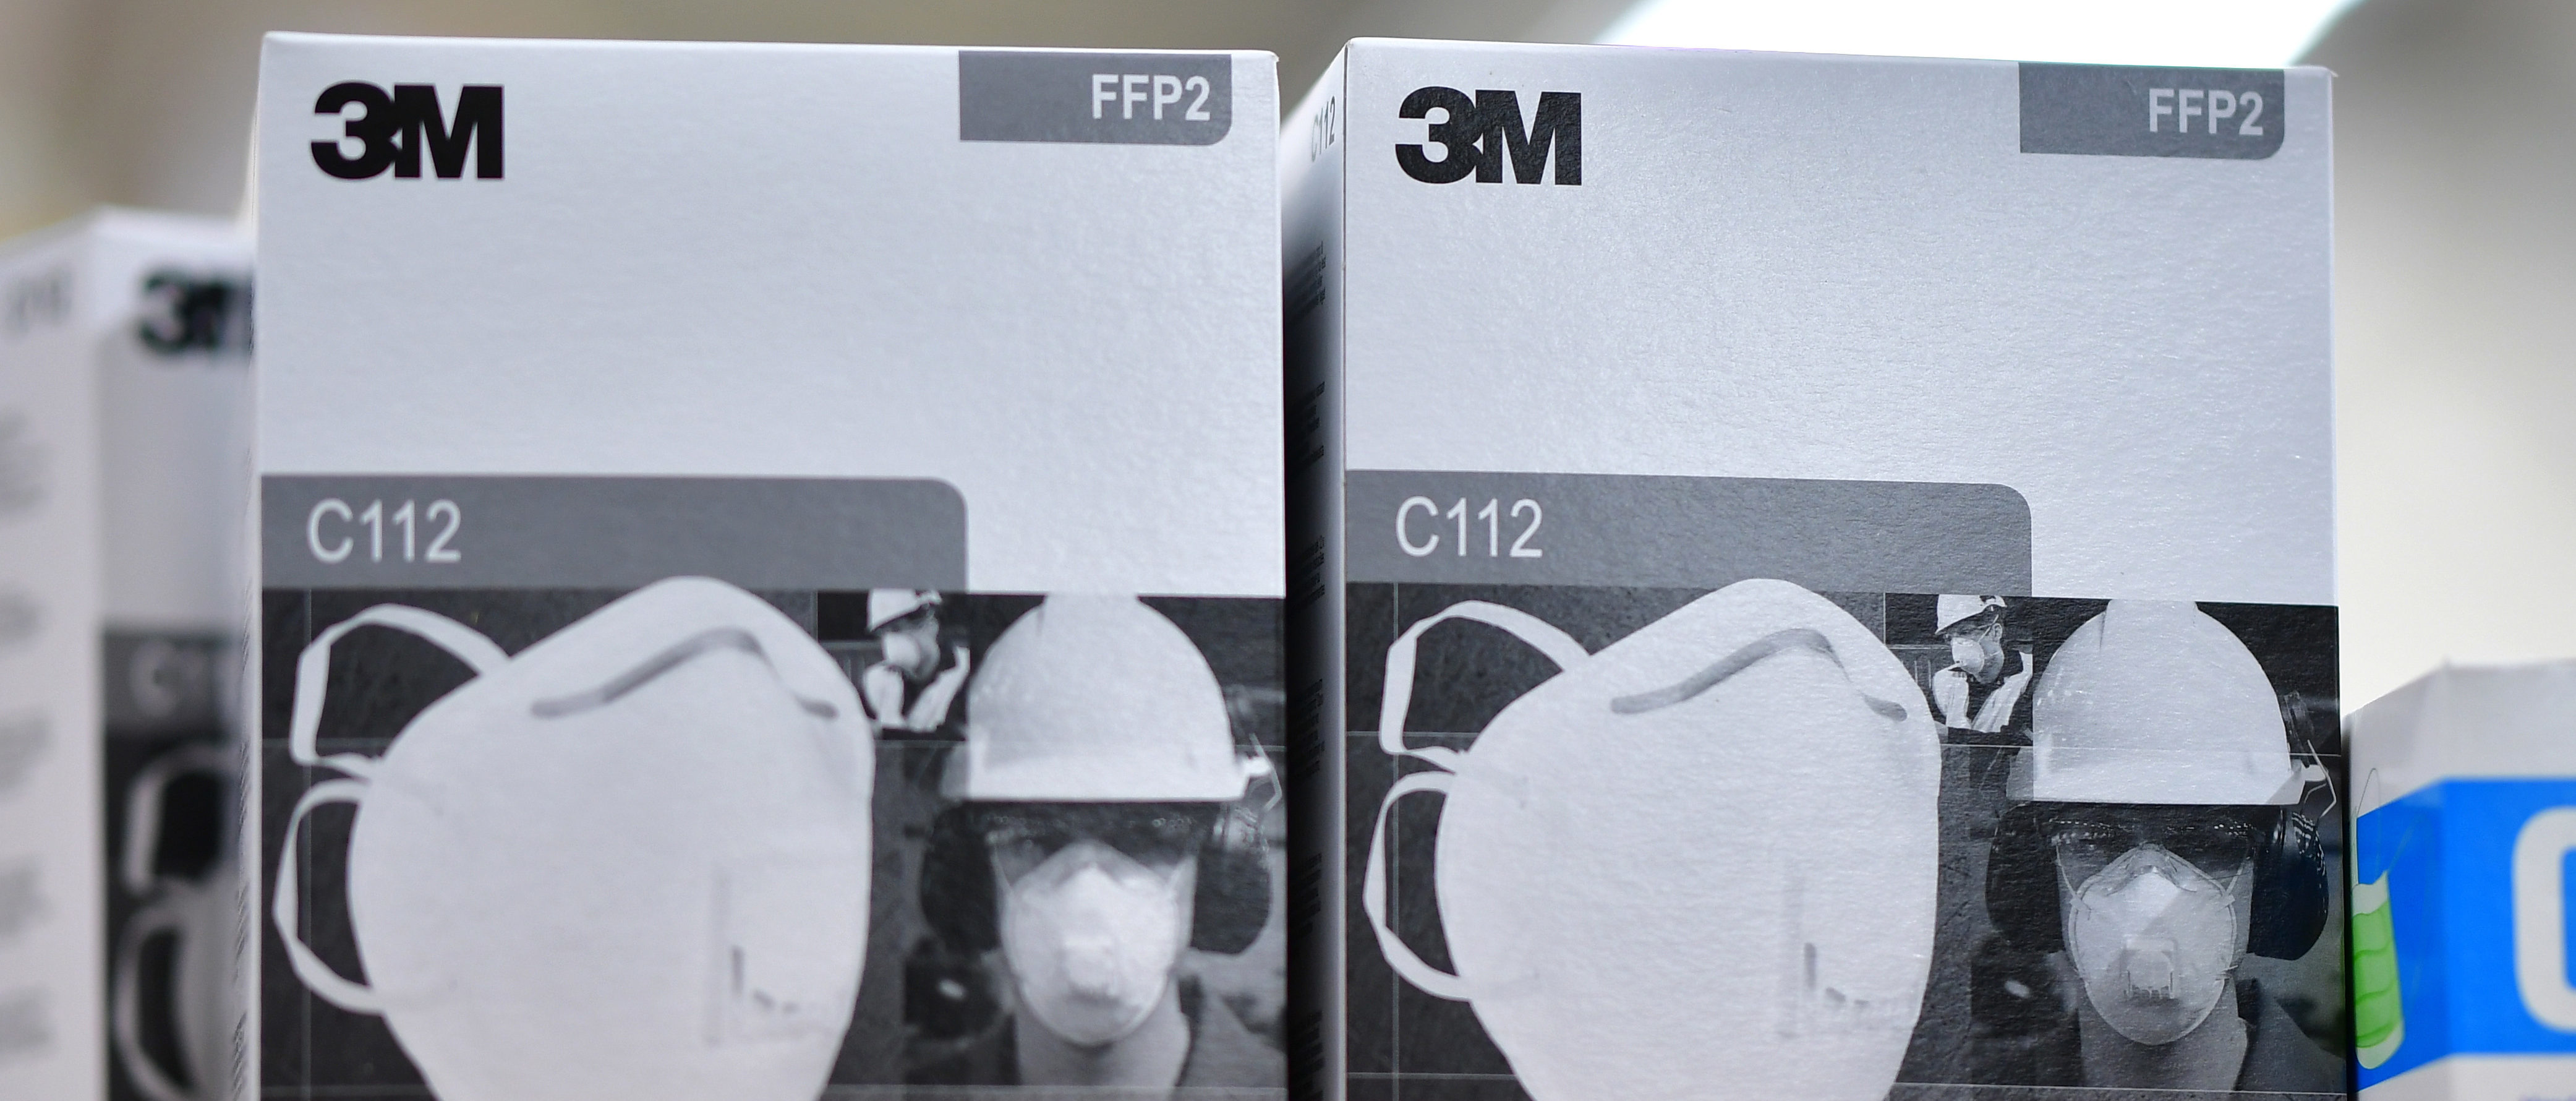 3M FFFP2 face masks stand on a table at a Bundeswehr medical warehouse as the coronavirus crisis continues on April 8, 2020 in Blankenburg, Germany. (Photo by Alexander Koerner/Getty Images)